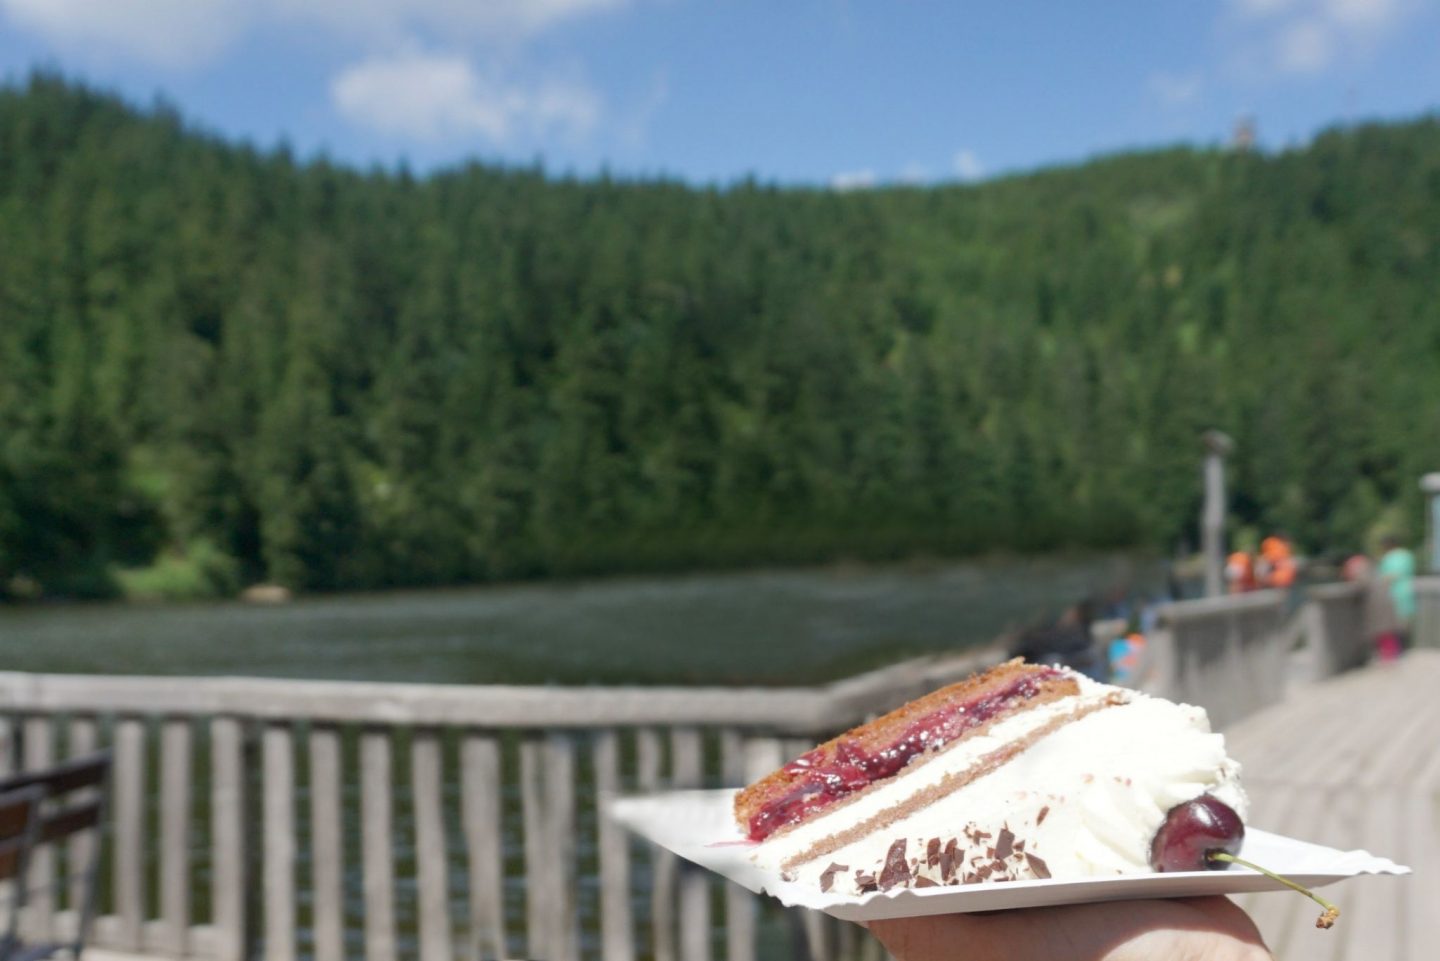 Black Forest Gateaux at the Black Forest